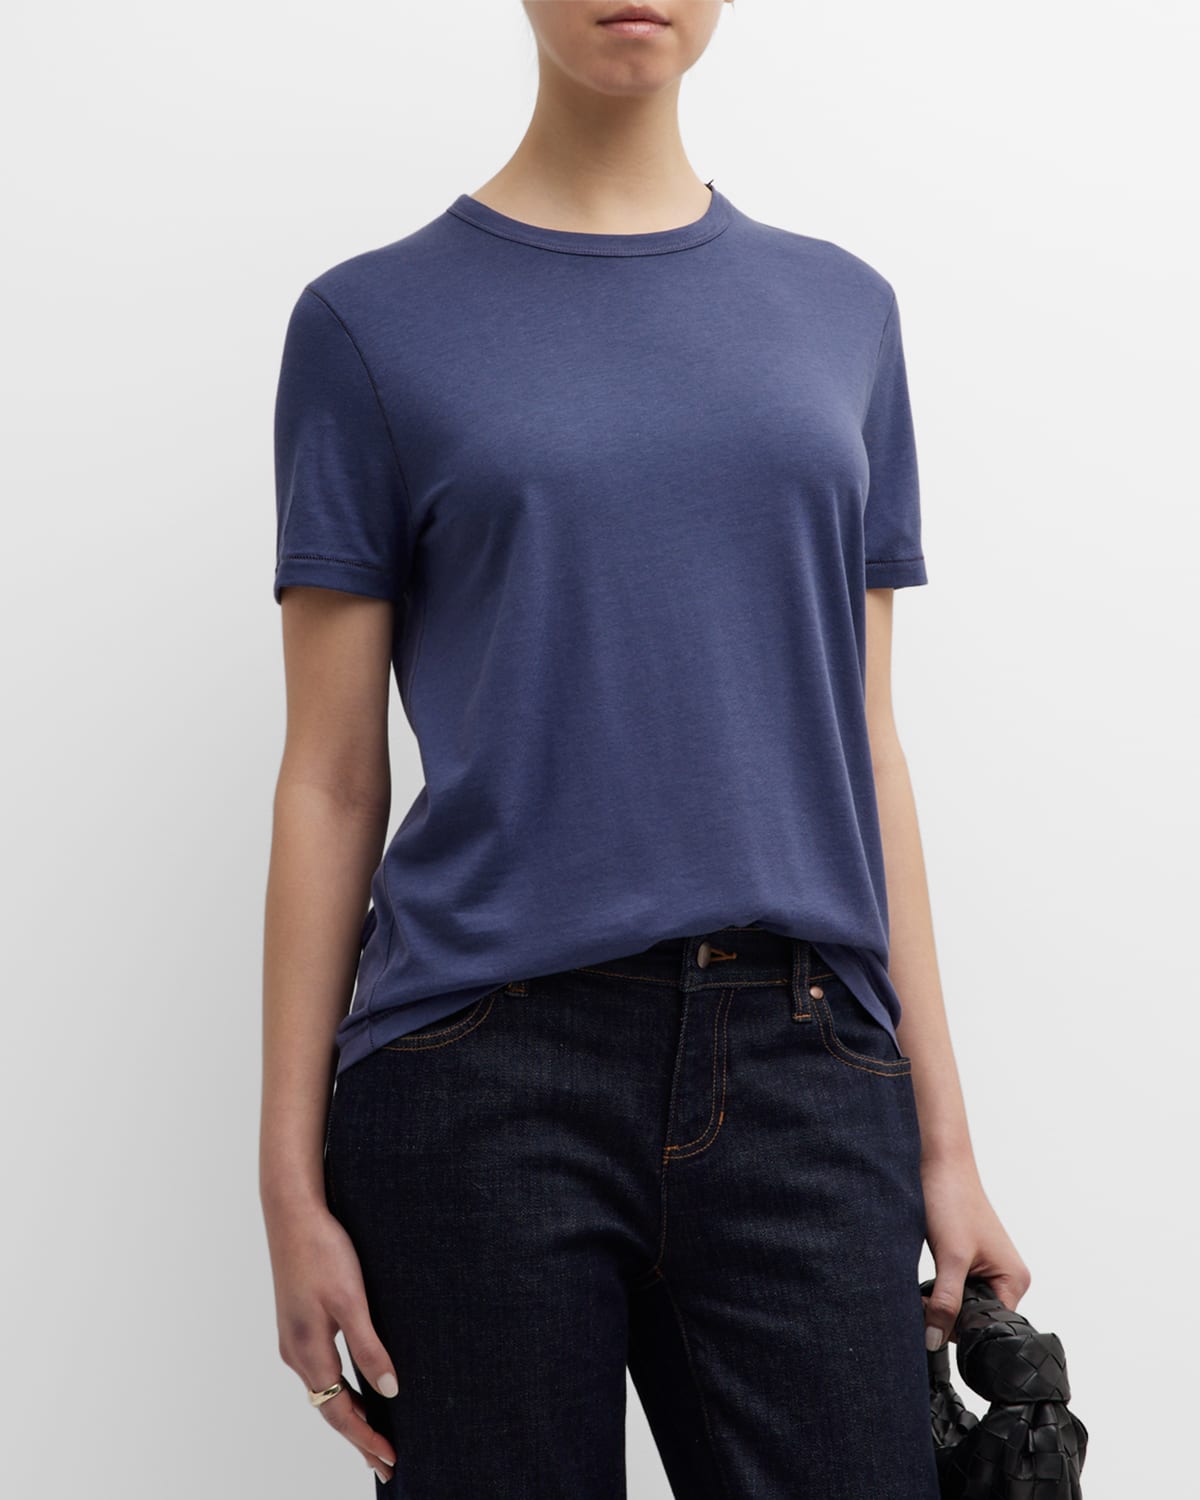 Majestic Lyocell Cotton Semi-relaxed Short-sleeve Crewneck Tee In Venice Blue